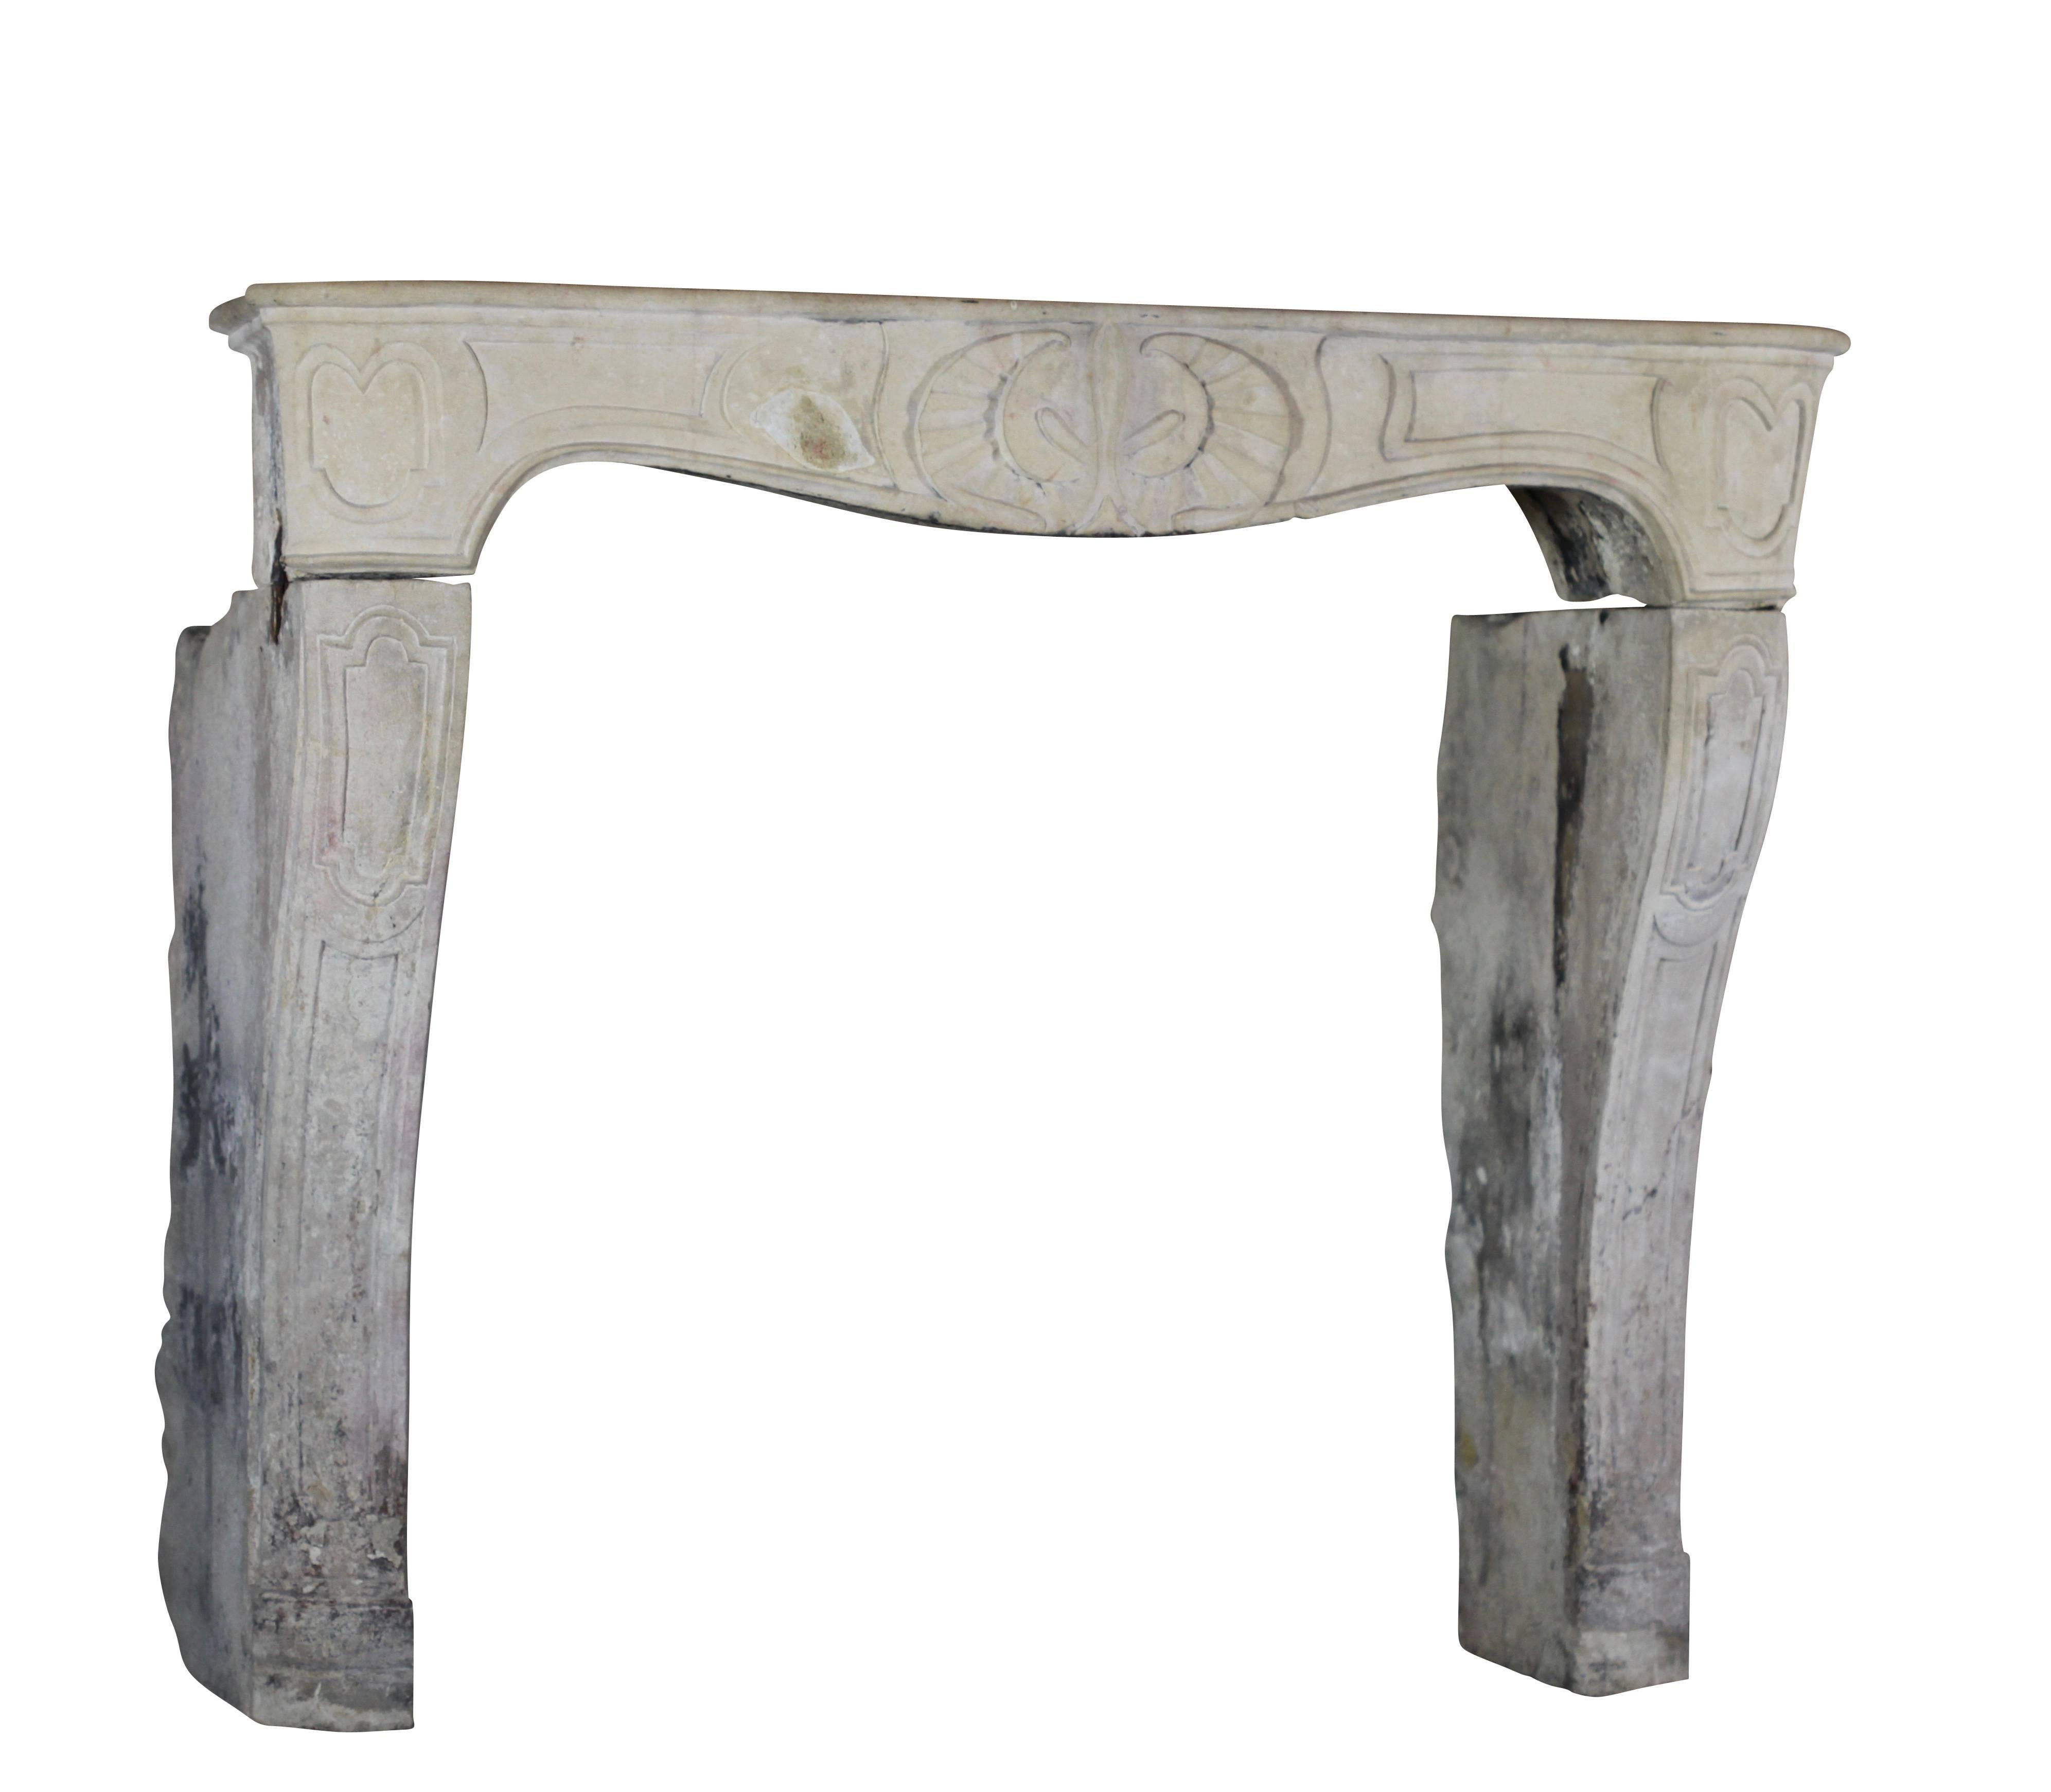 Rustic petite fireplace surround in limestone. A country look is an extra for this item,
Early Regency period. The stone has a nice patina.
Measures:
129.5 cm Exterior Width 50.98